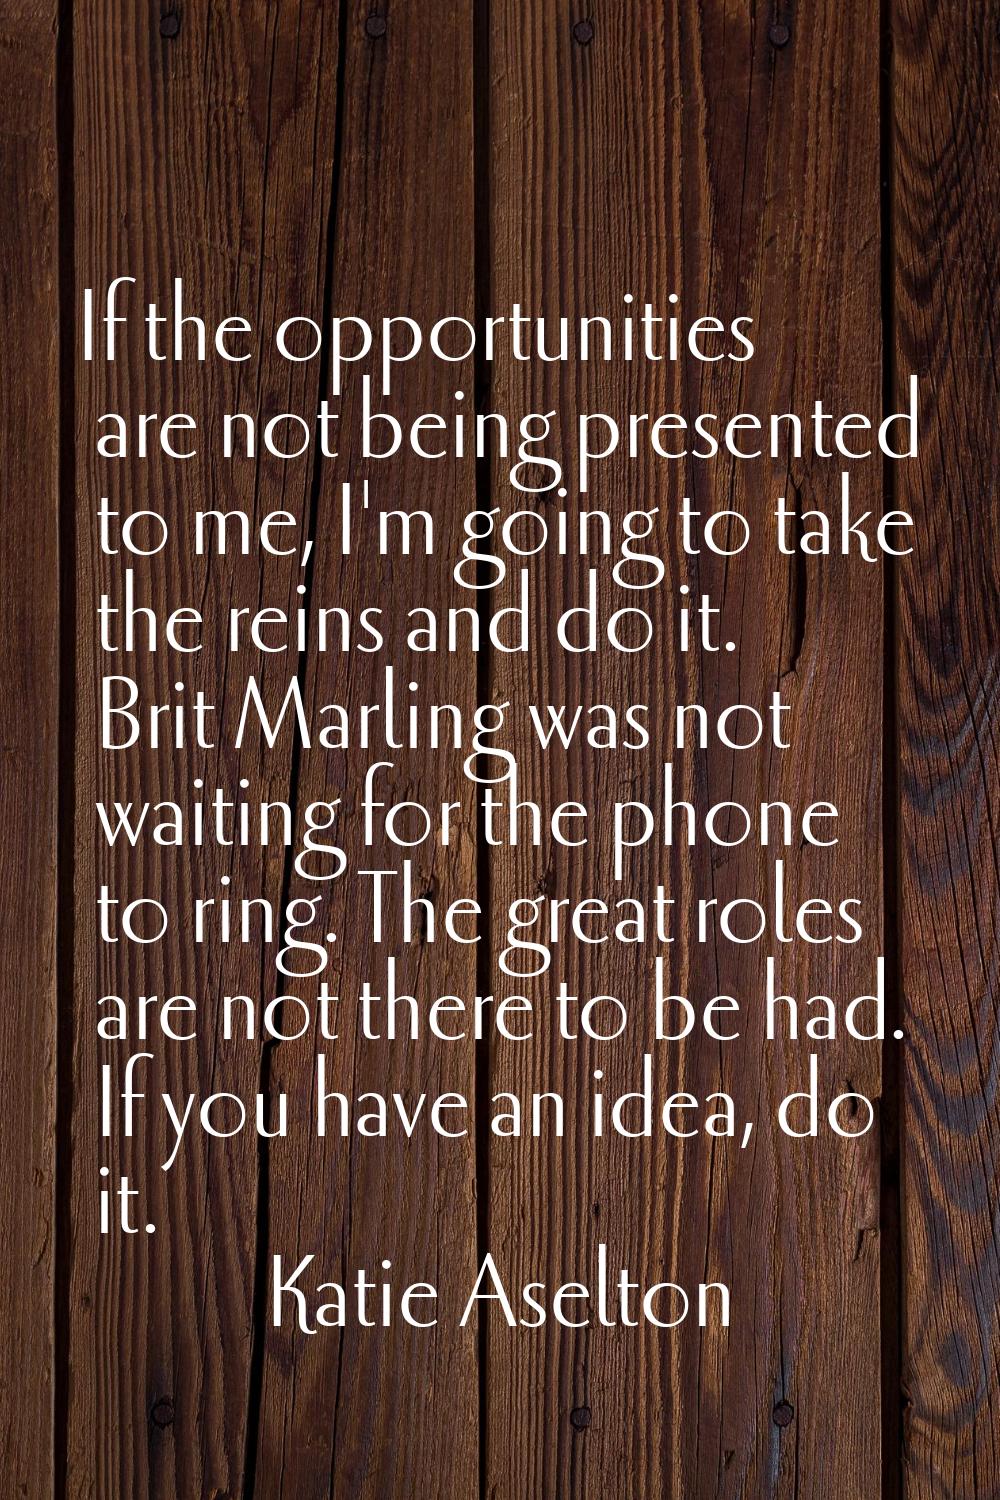 If the opportunities are not being presented to me, I'm going to take the reins and do it. Brit Mar